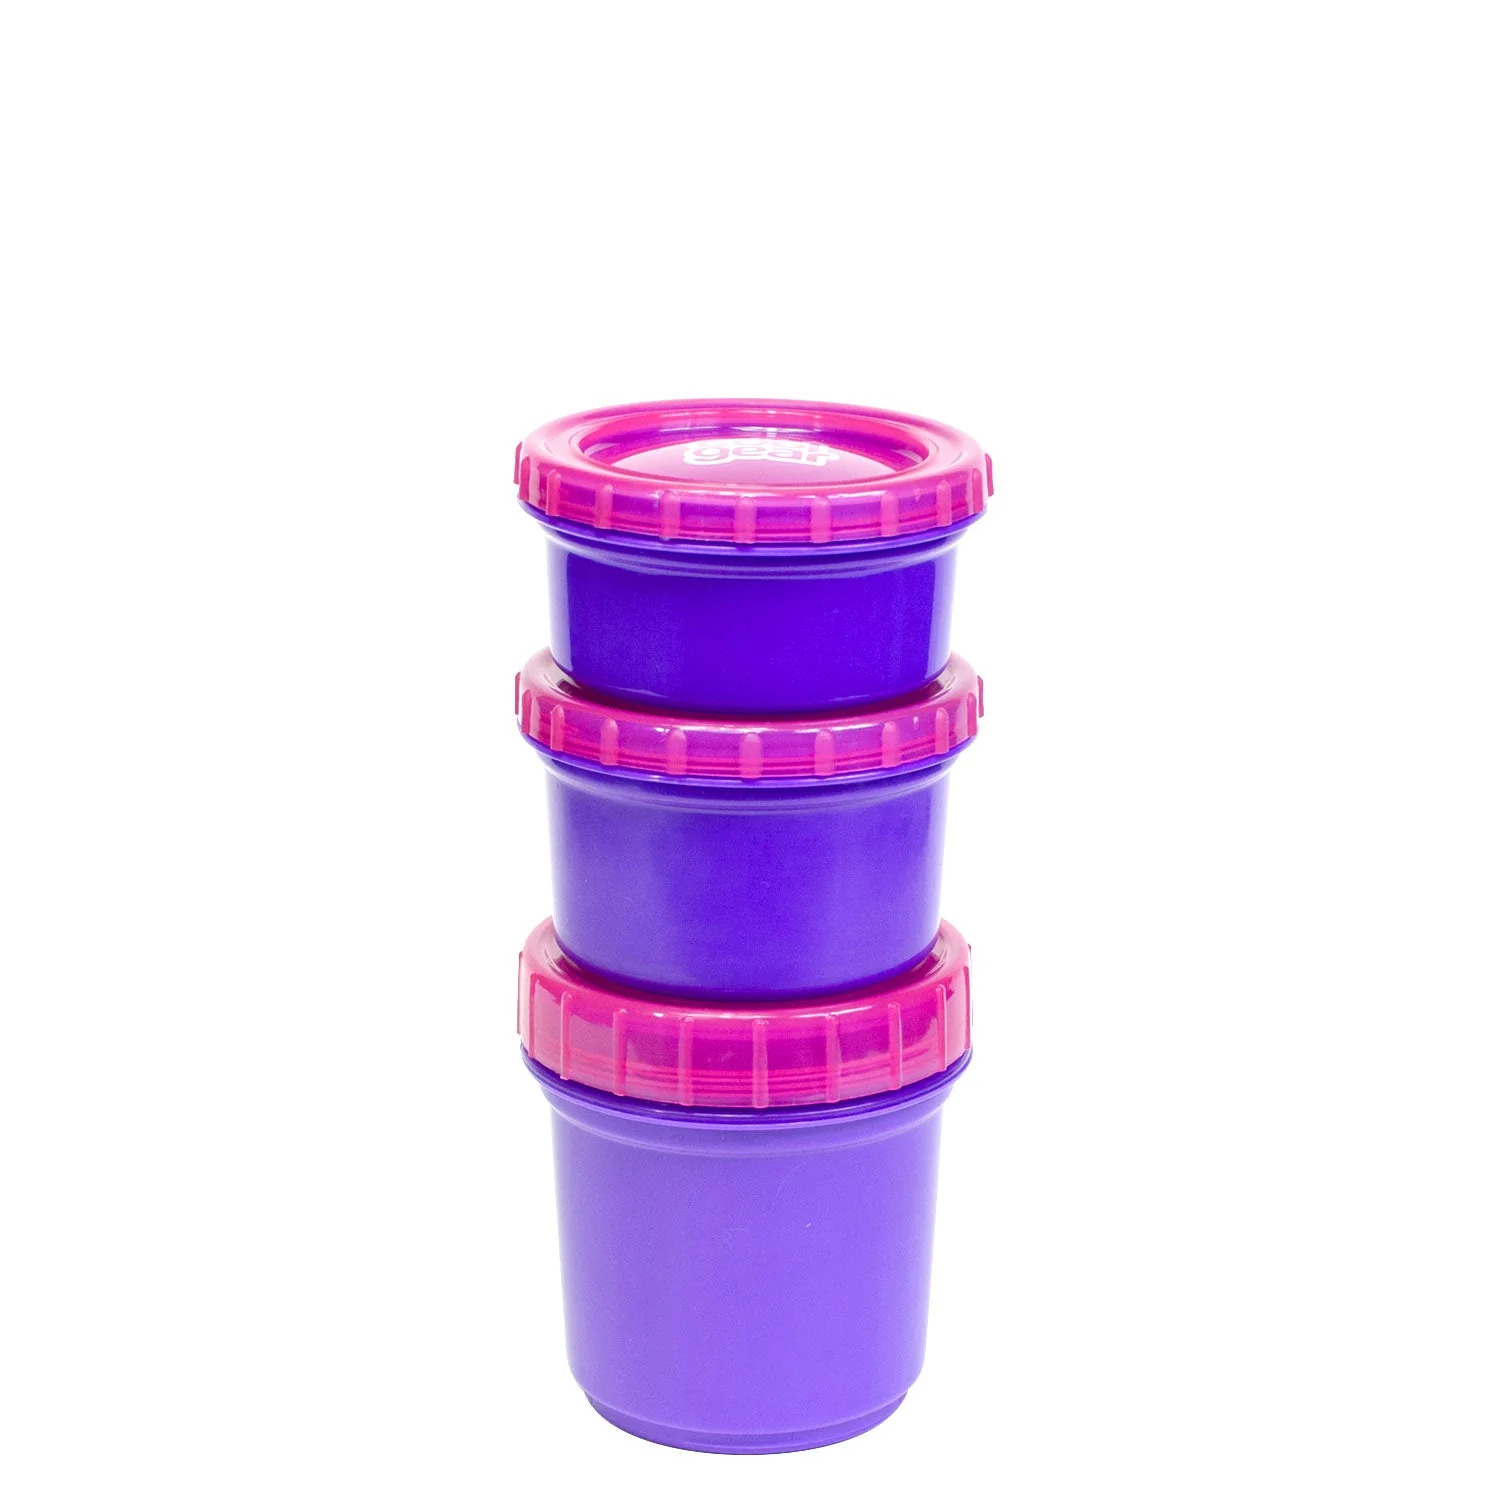 Cool Gear 2-Pack Kids Stackable Snack Snap Containers with Freezer Gel | 3 Reusable Food Containers With Twist Off Lids | Double Insulated with Freezer Gel To Keep Food Cold - Pink/Purple - image 3 of 5